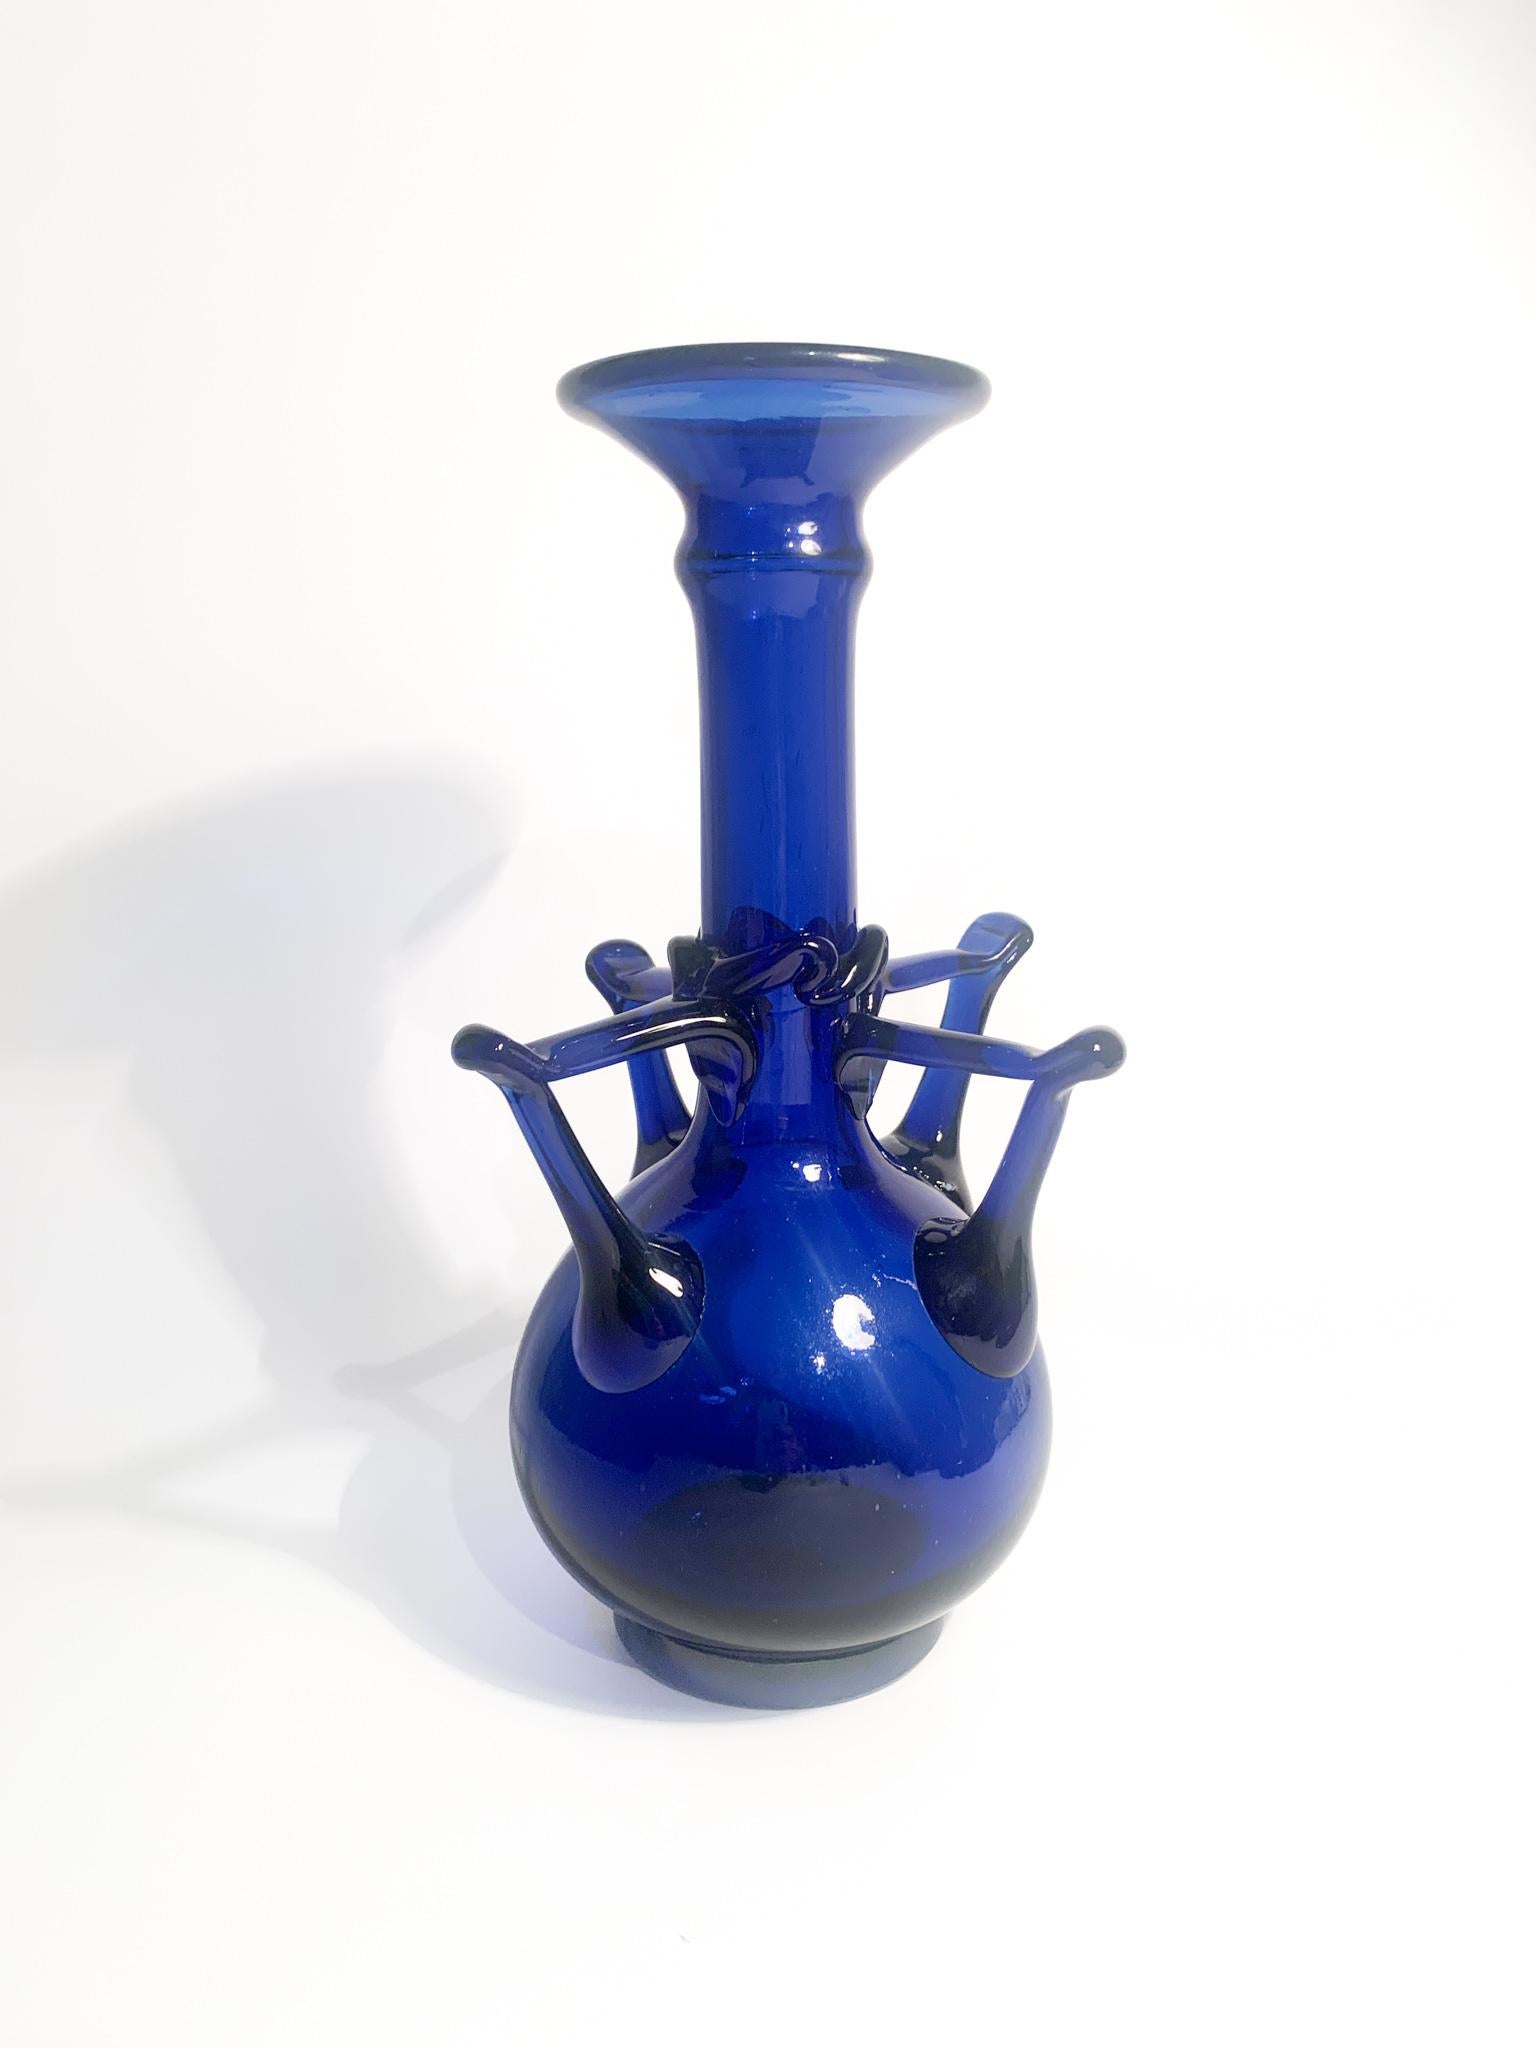 Blue Murano glass vase, whose creation is attributed to the Toso Brothers in the 1940s

Ø cm 16 h cm 28,5

Barovier & Toso is a glass factory, known for its handcrafted collections of decorative Murano glass in the 20th century. The chemical